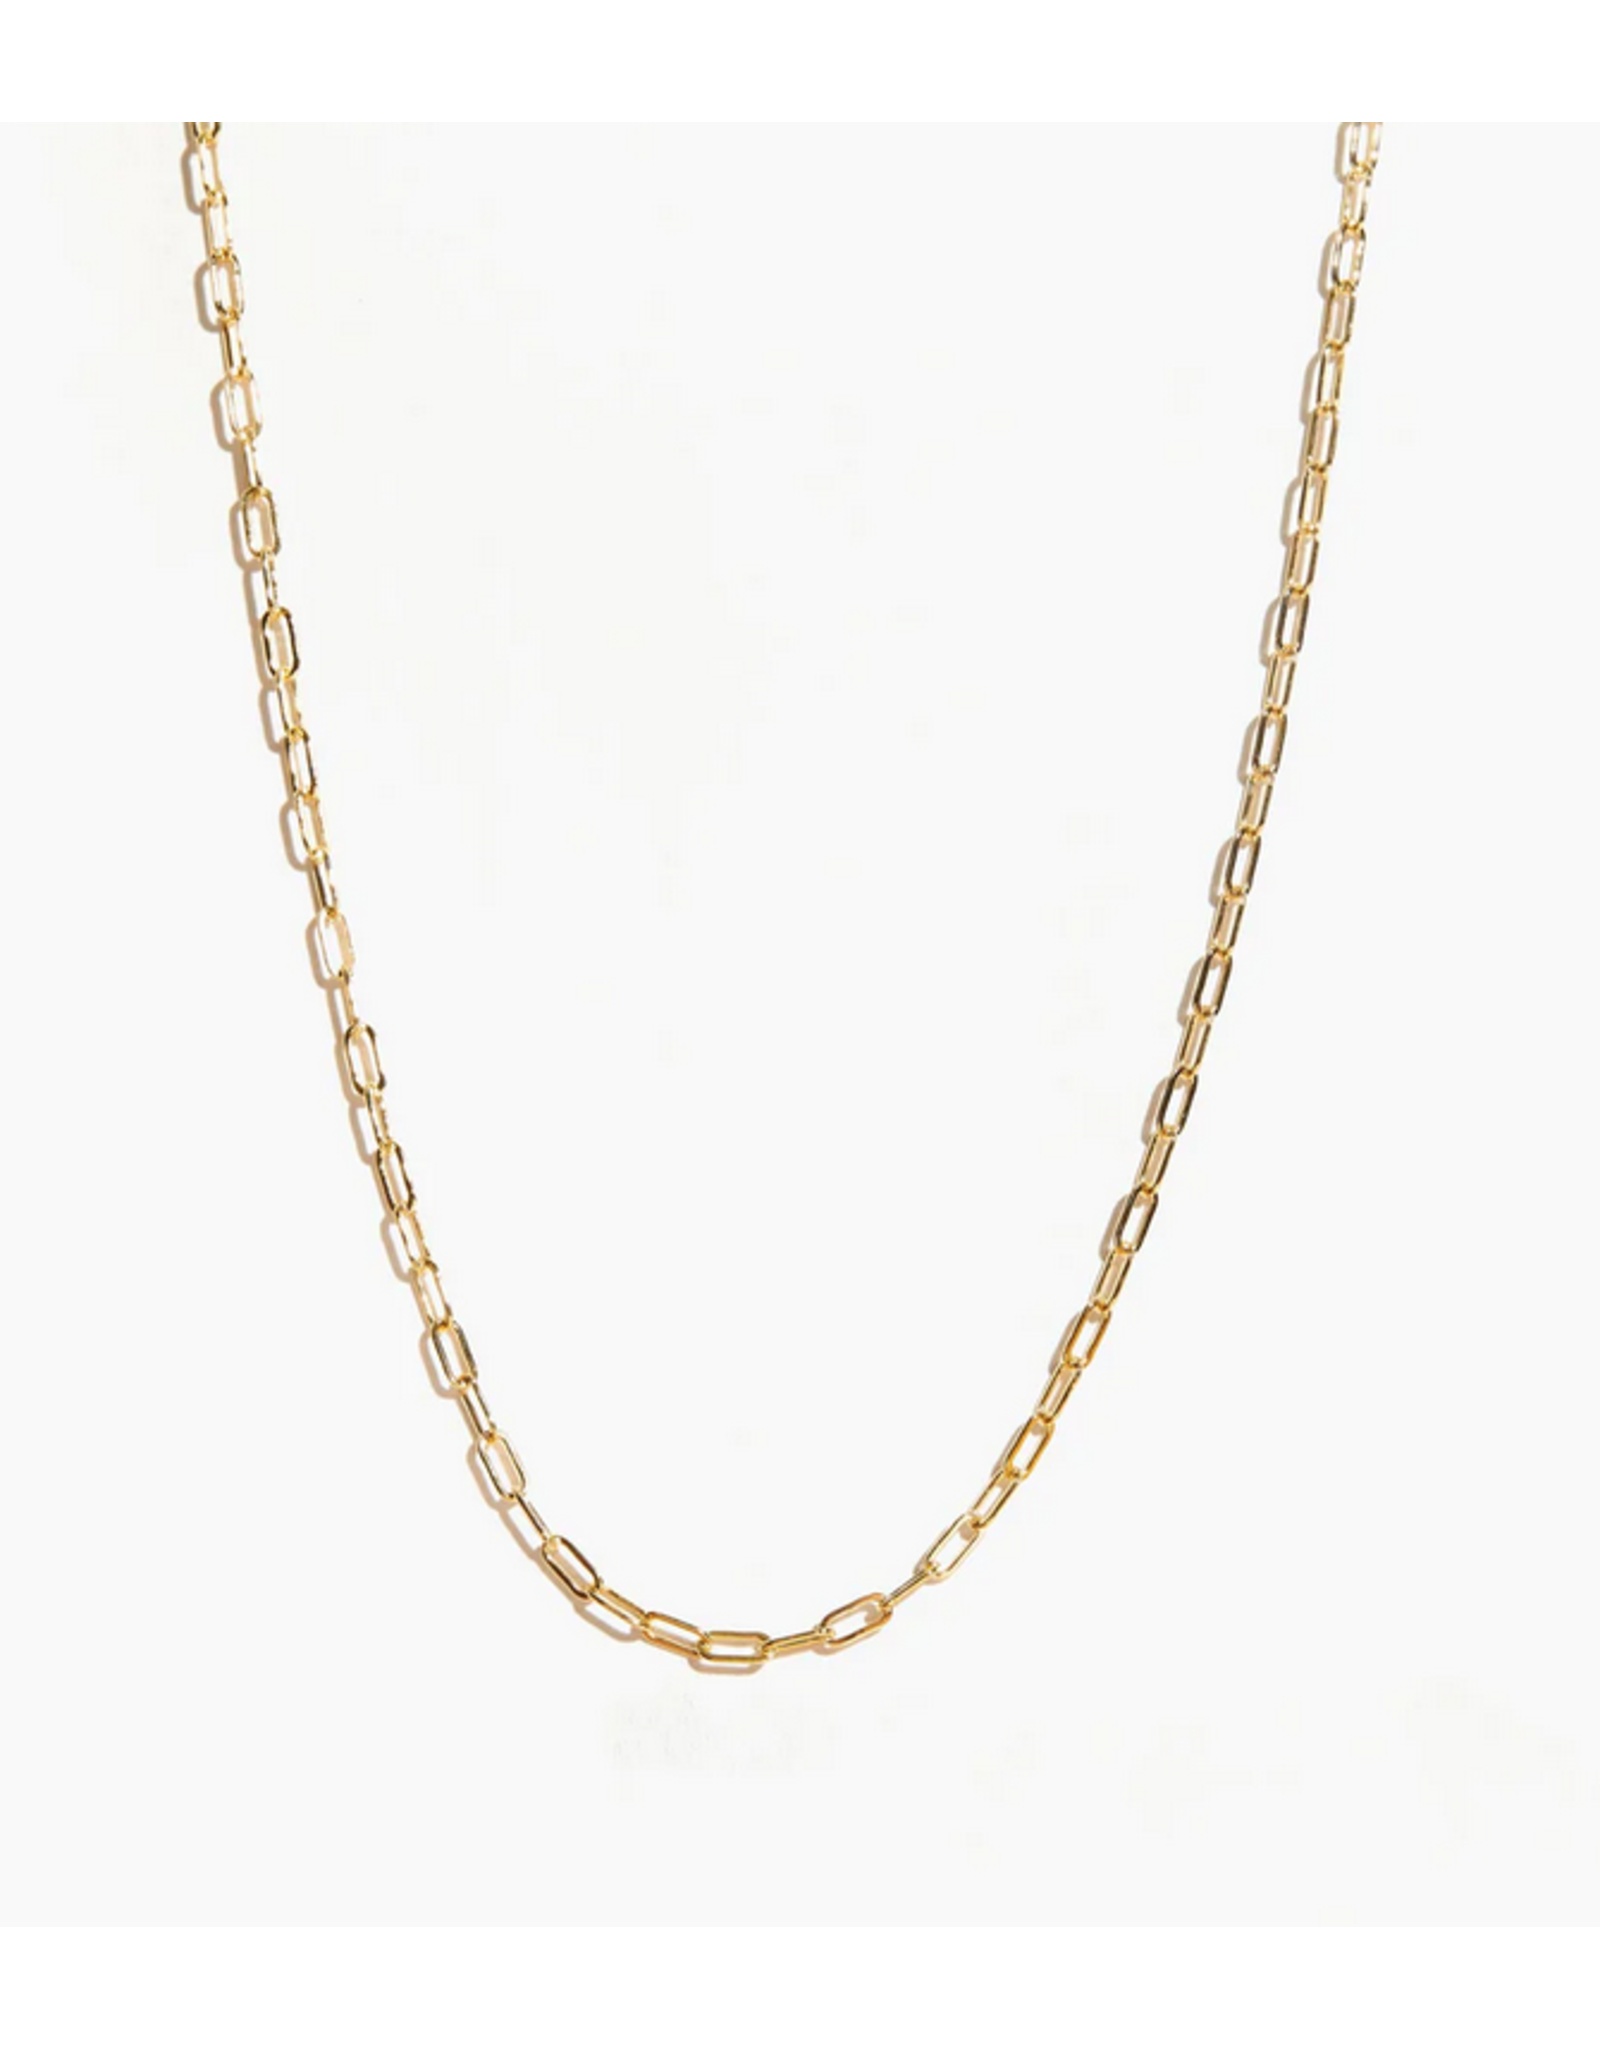 ABLE Able Essential Chain Necklace, 16"